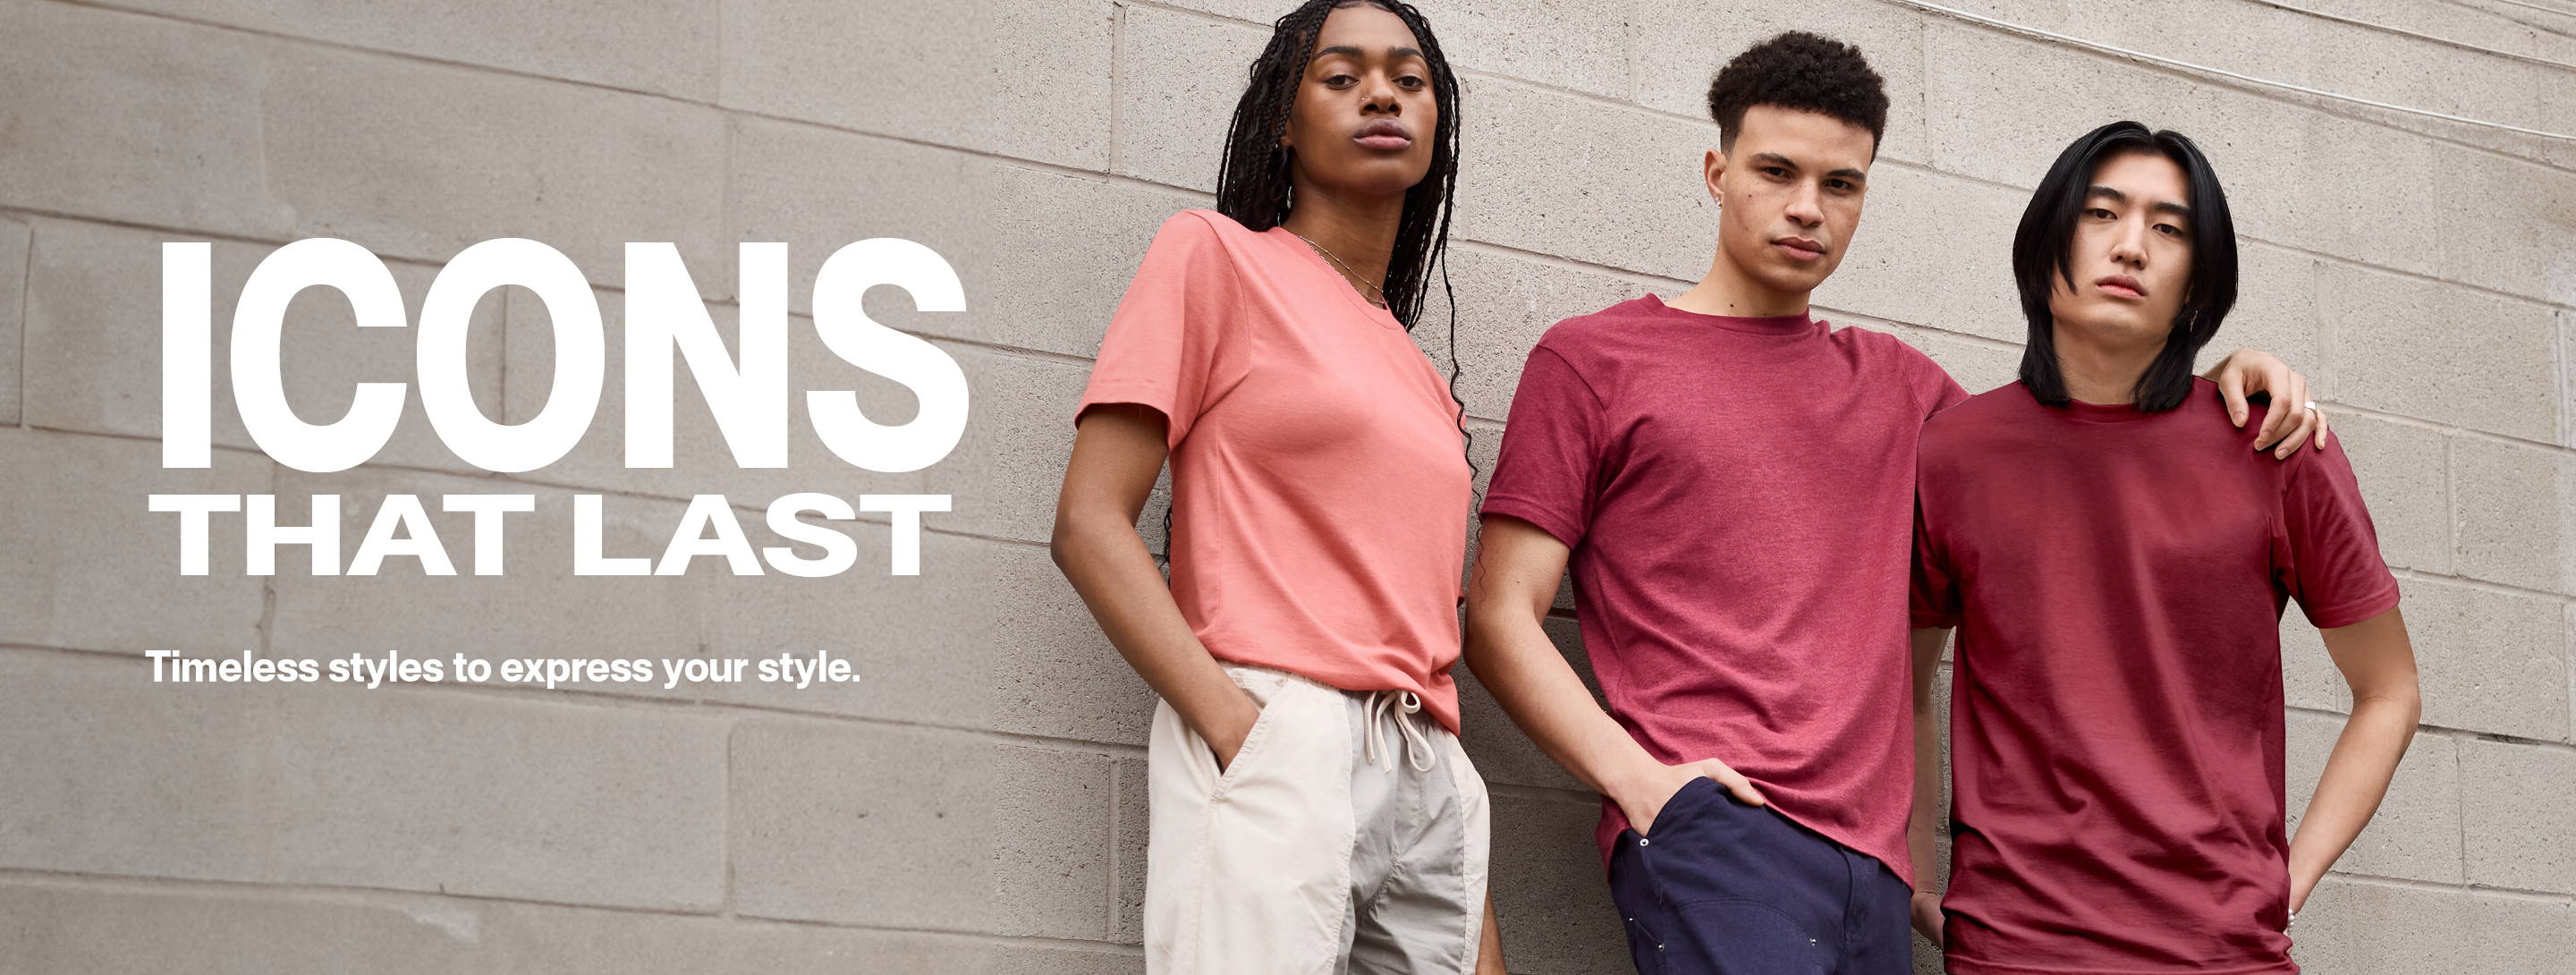 Icons That Last | Timeless styles to express your style. | American Apparel USA